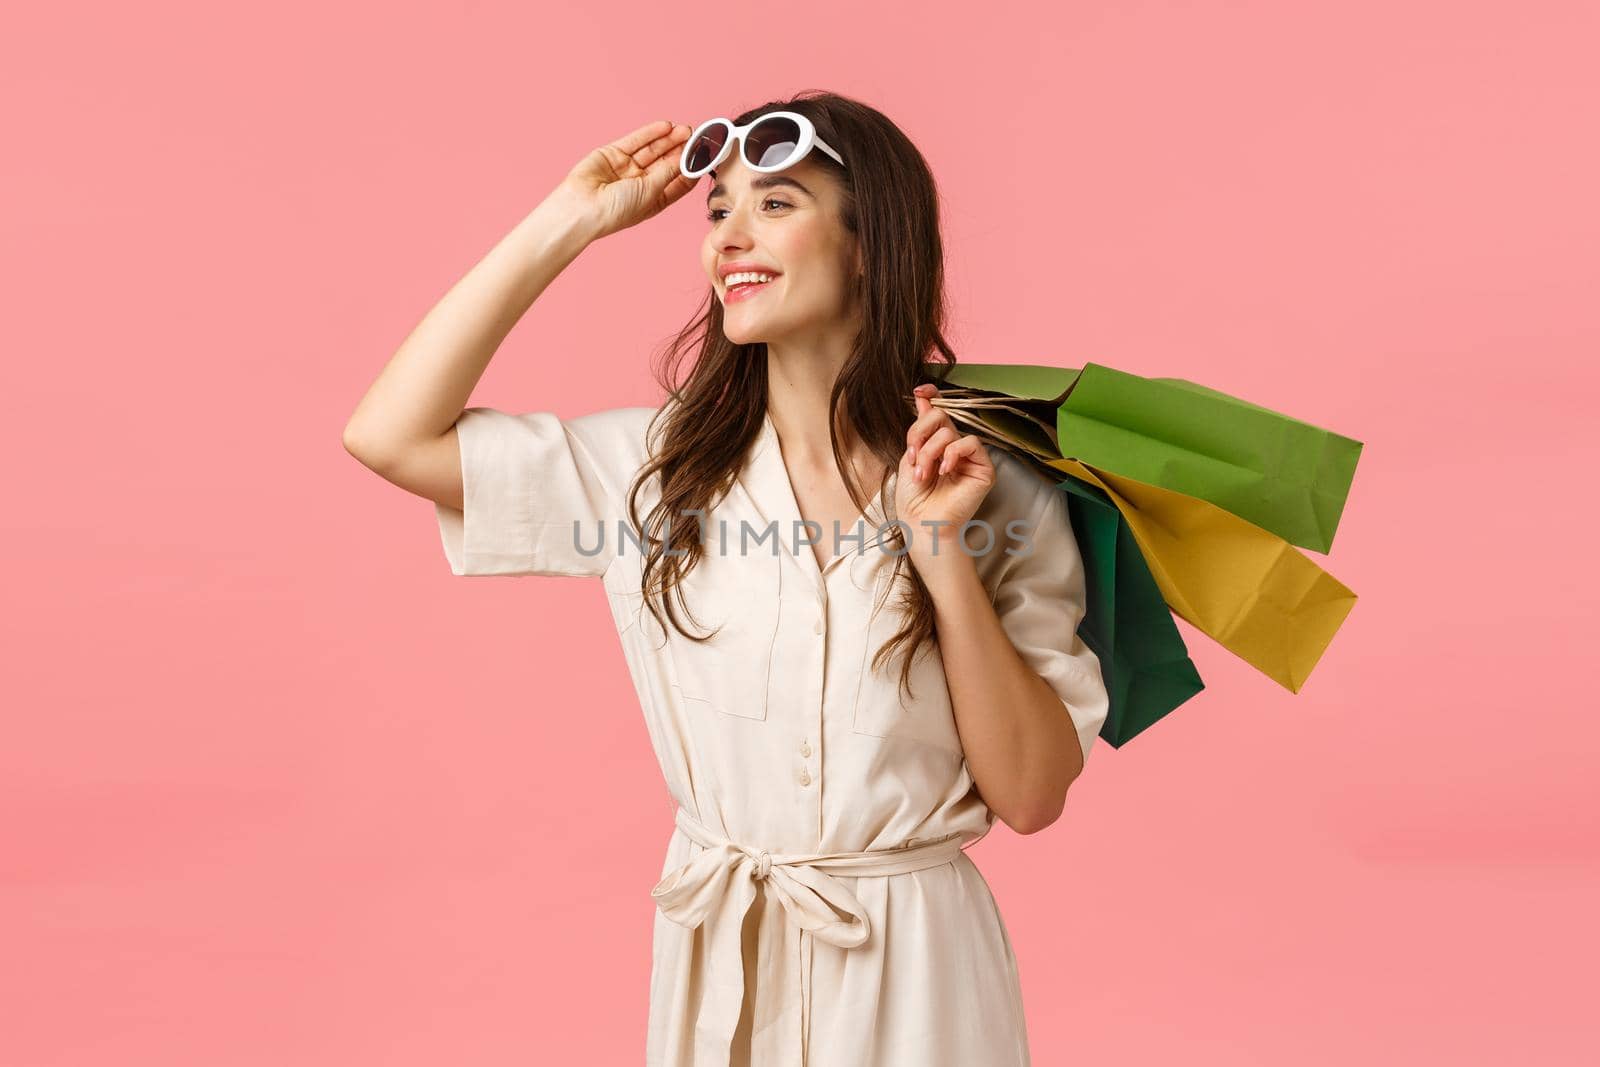 Carefree enthusiastic woman in dress, taking off glasses and looking happily sideways as enjoying beautiful day, fantastic shopping with discounts, holding shop bags behind back, pink background.